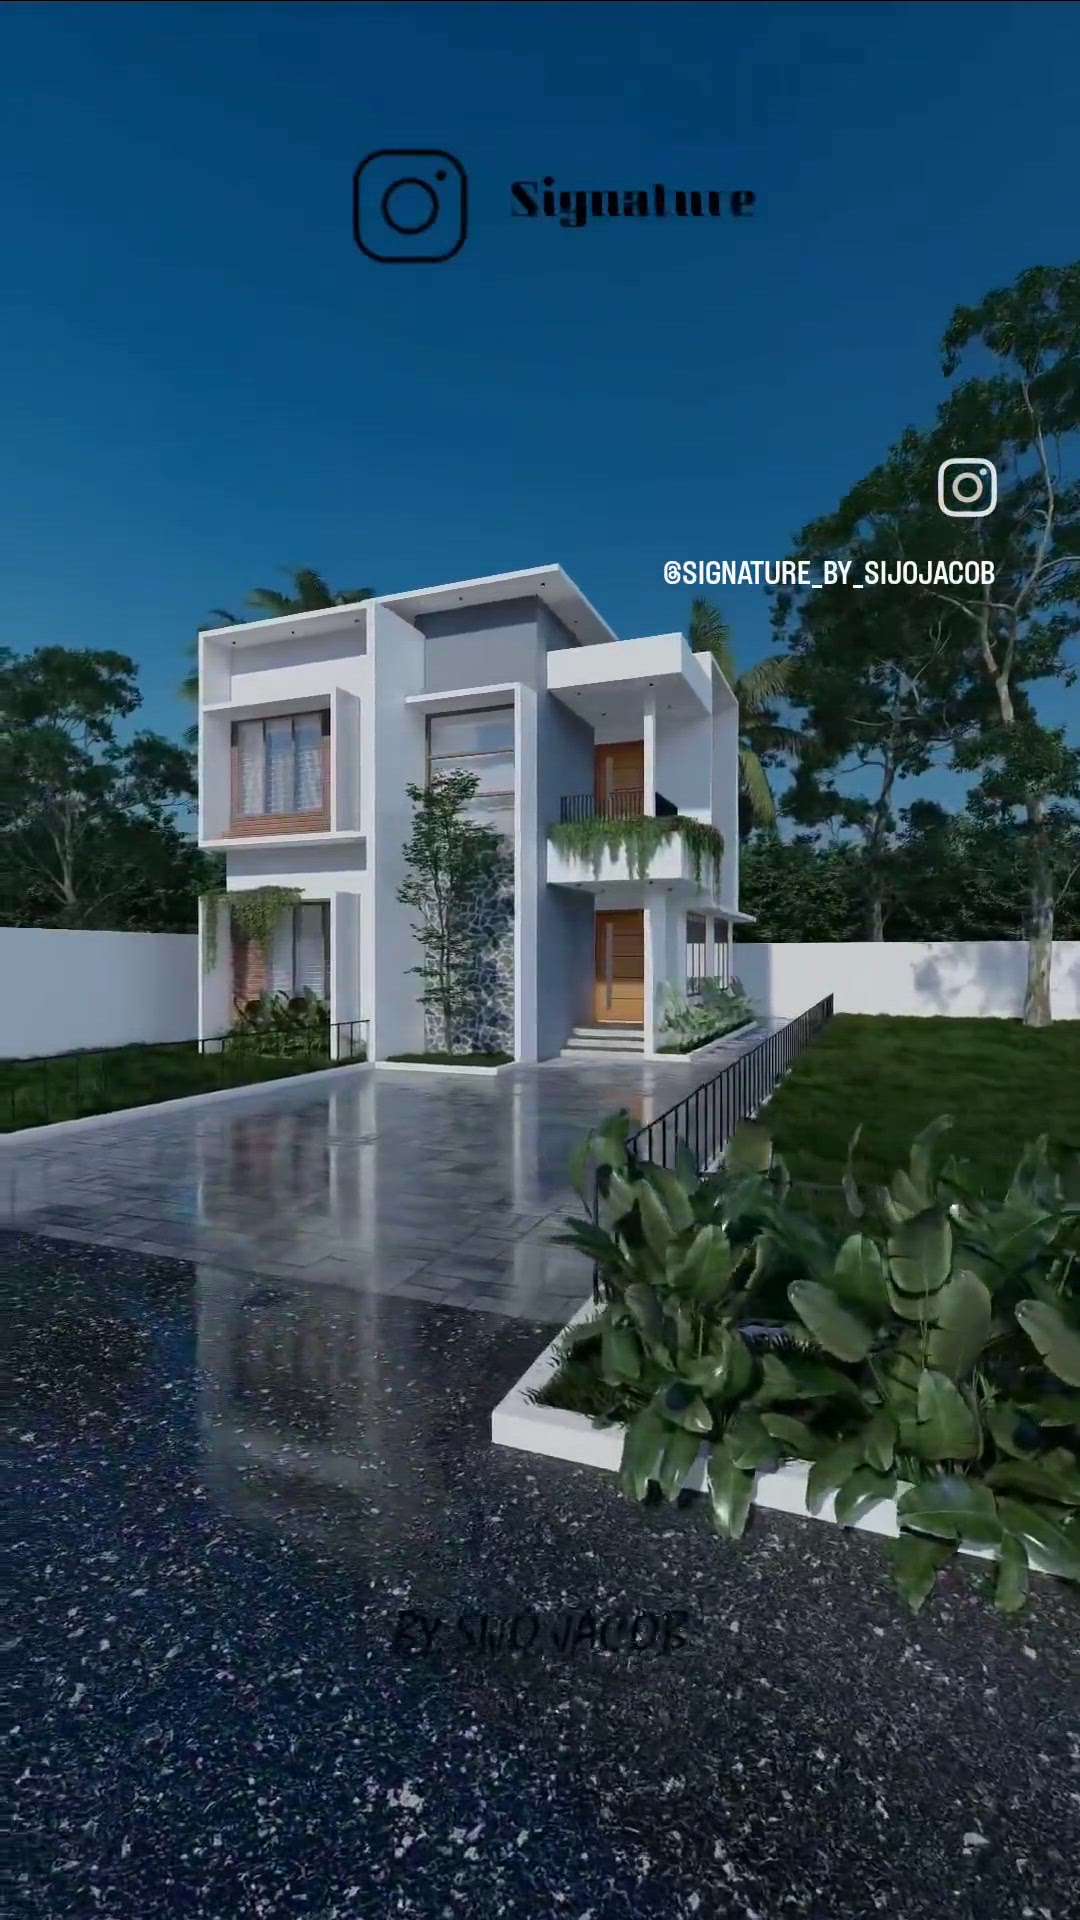 3 bhk, total area 1200 sqft. 
#modernhome #ContemporaryHouse #3d #3BHKHouse